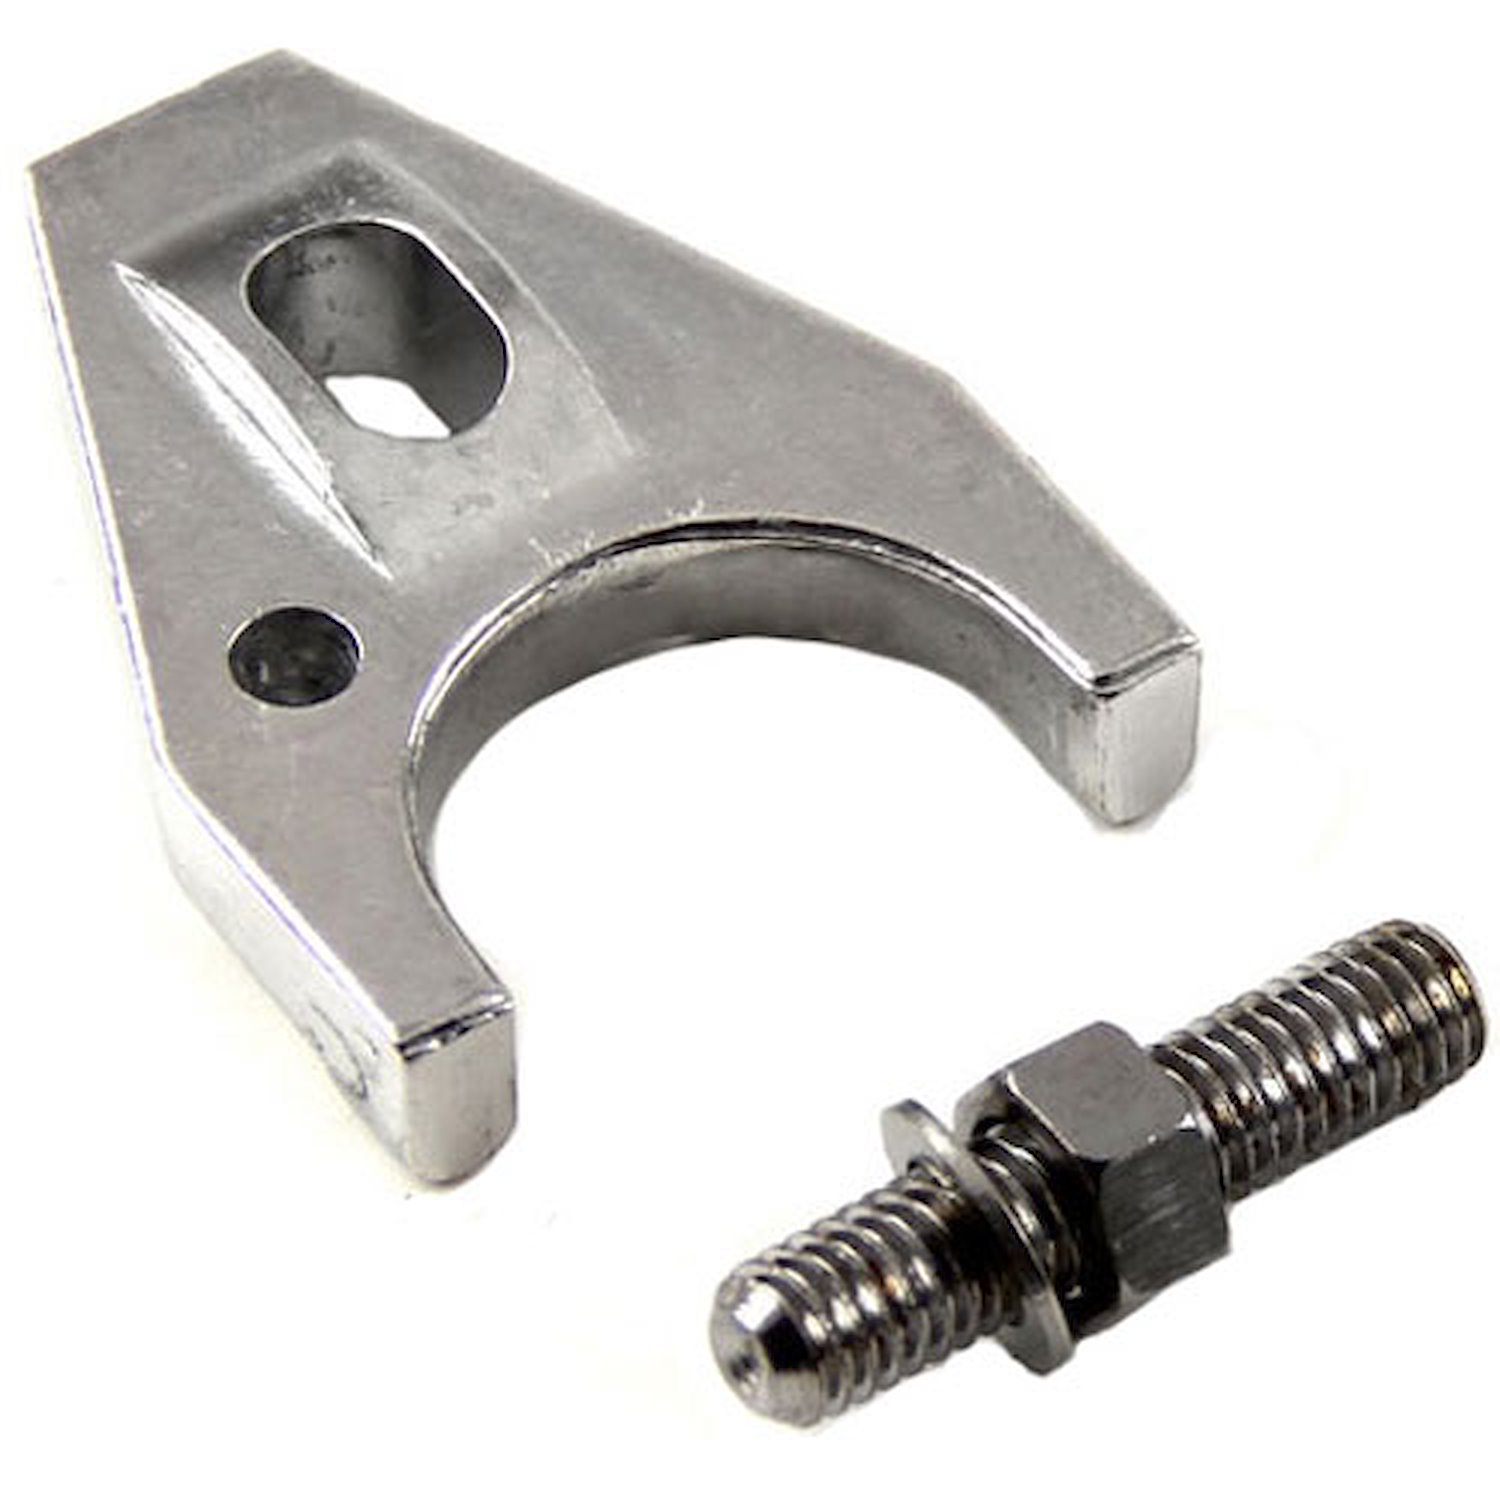 Aluminum Distributor Hold-Down Clamp Small Block Chevy 350